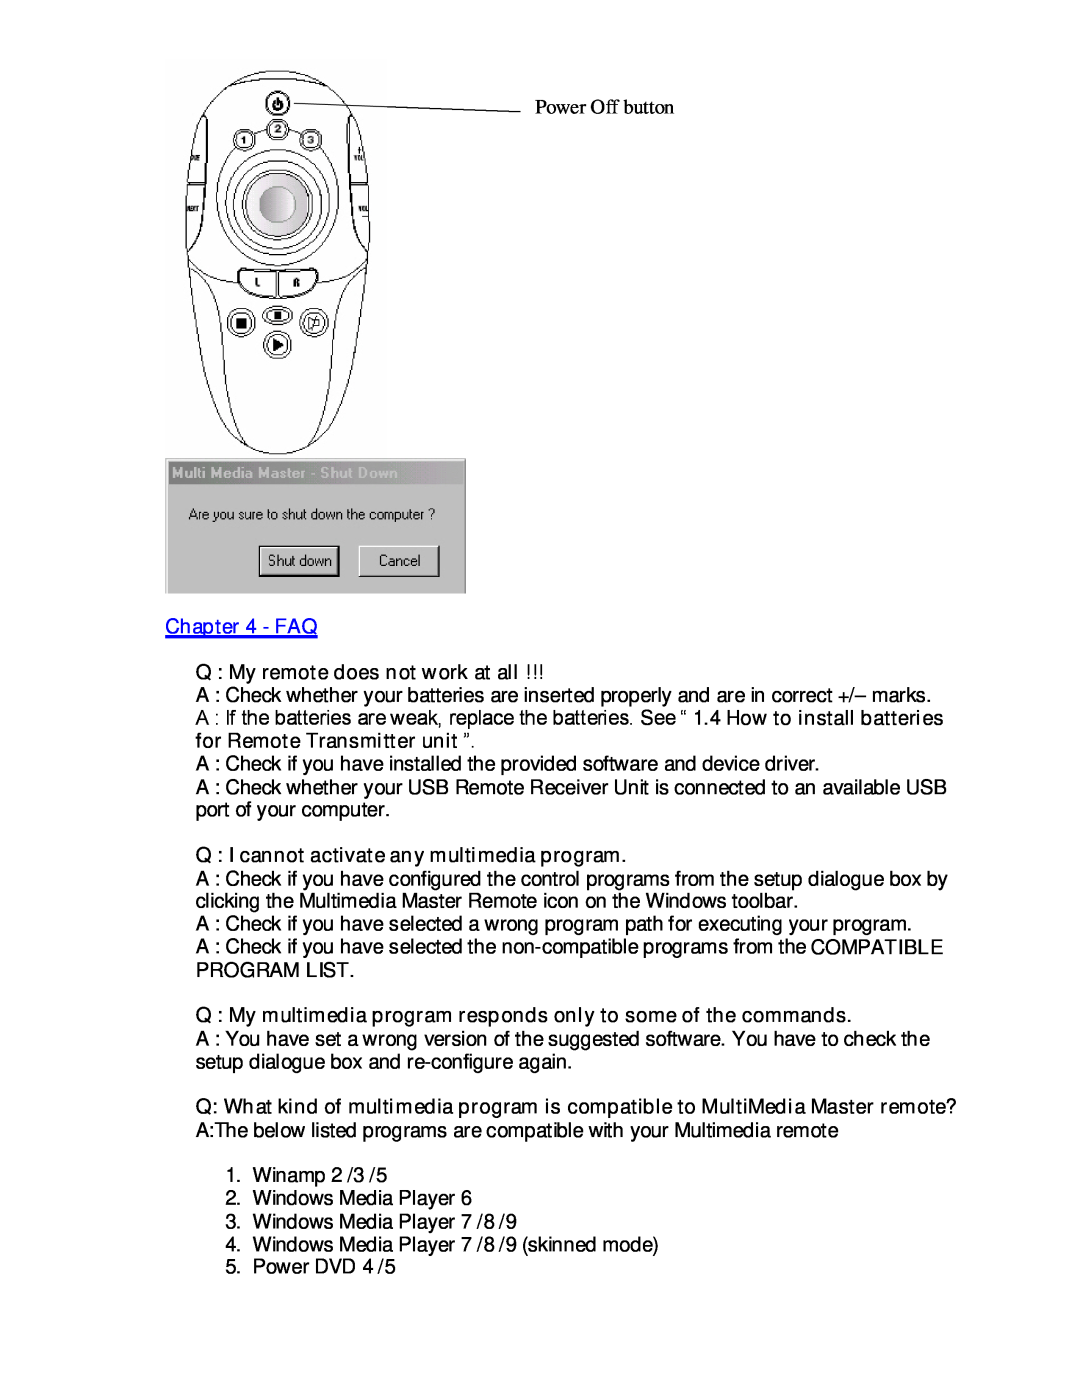 Remotec Multimedia Master Remote manual Faq, Q My remote does not work at all, Q I cannot activate any multimedia program 